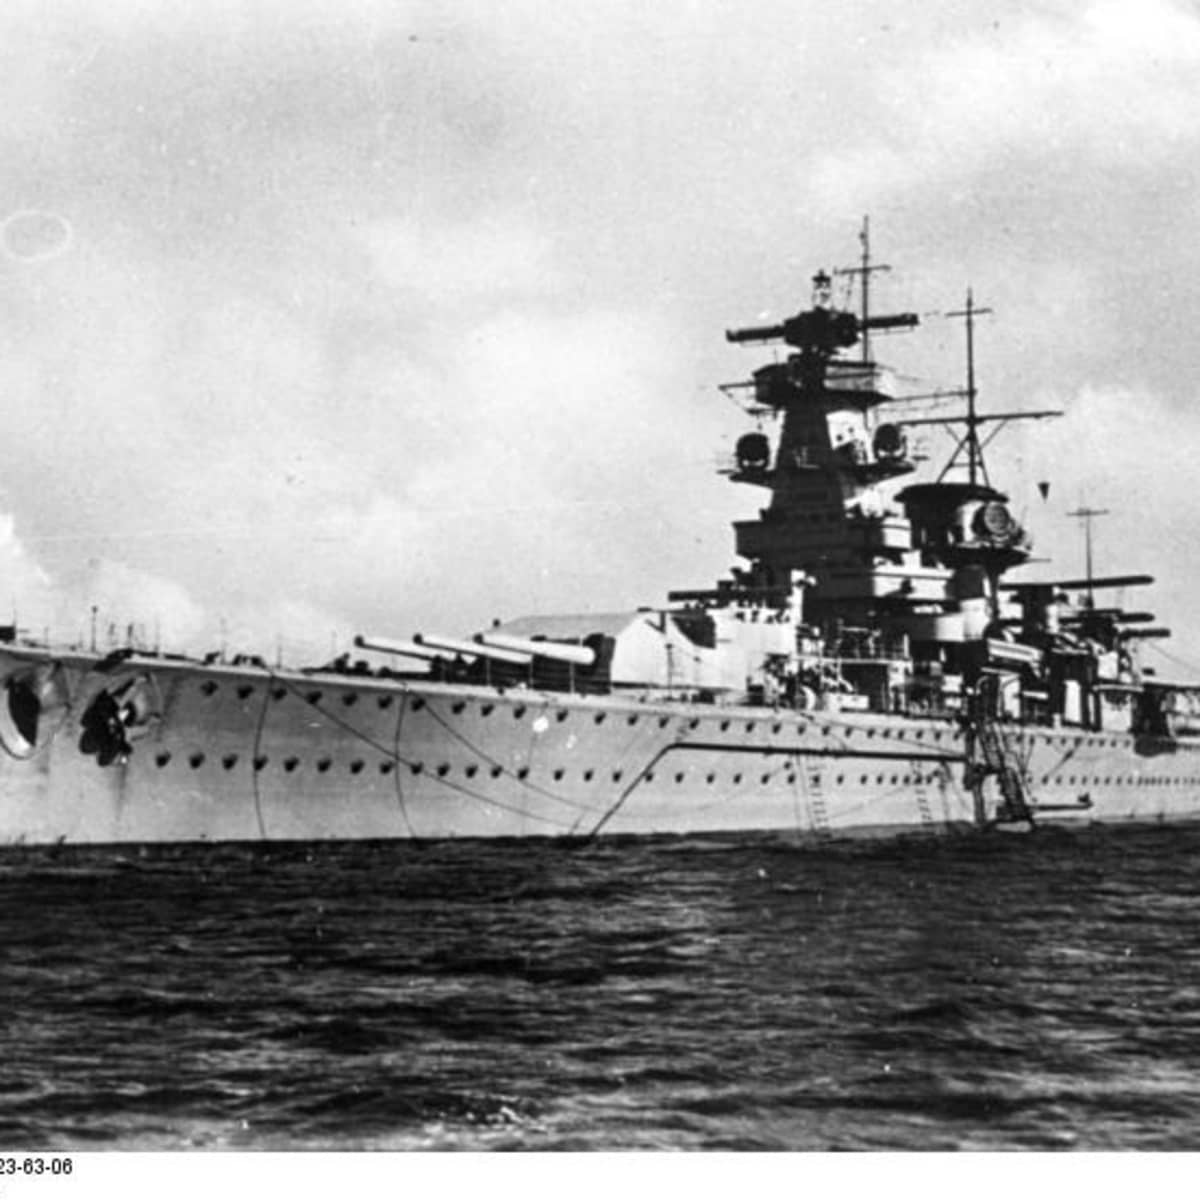 World War 2 History: Admiral Graf Spee Deceived Into Scuttling in 